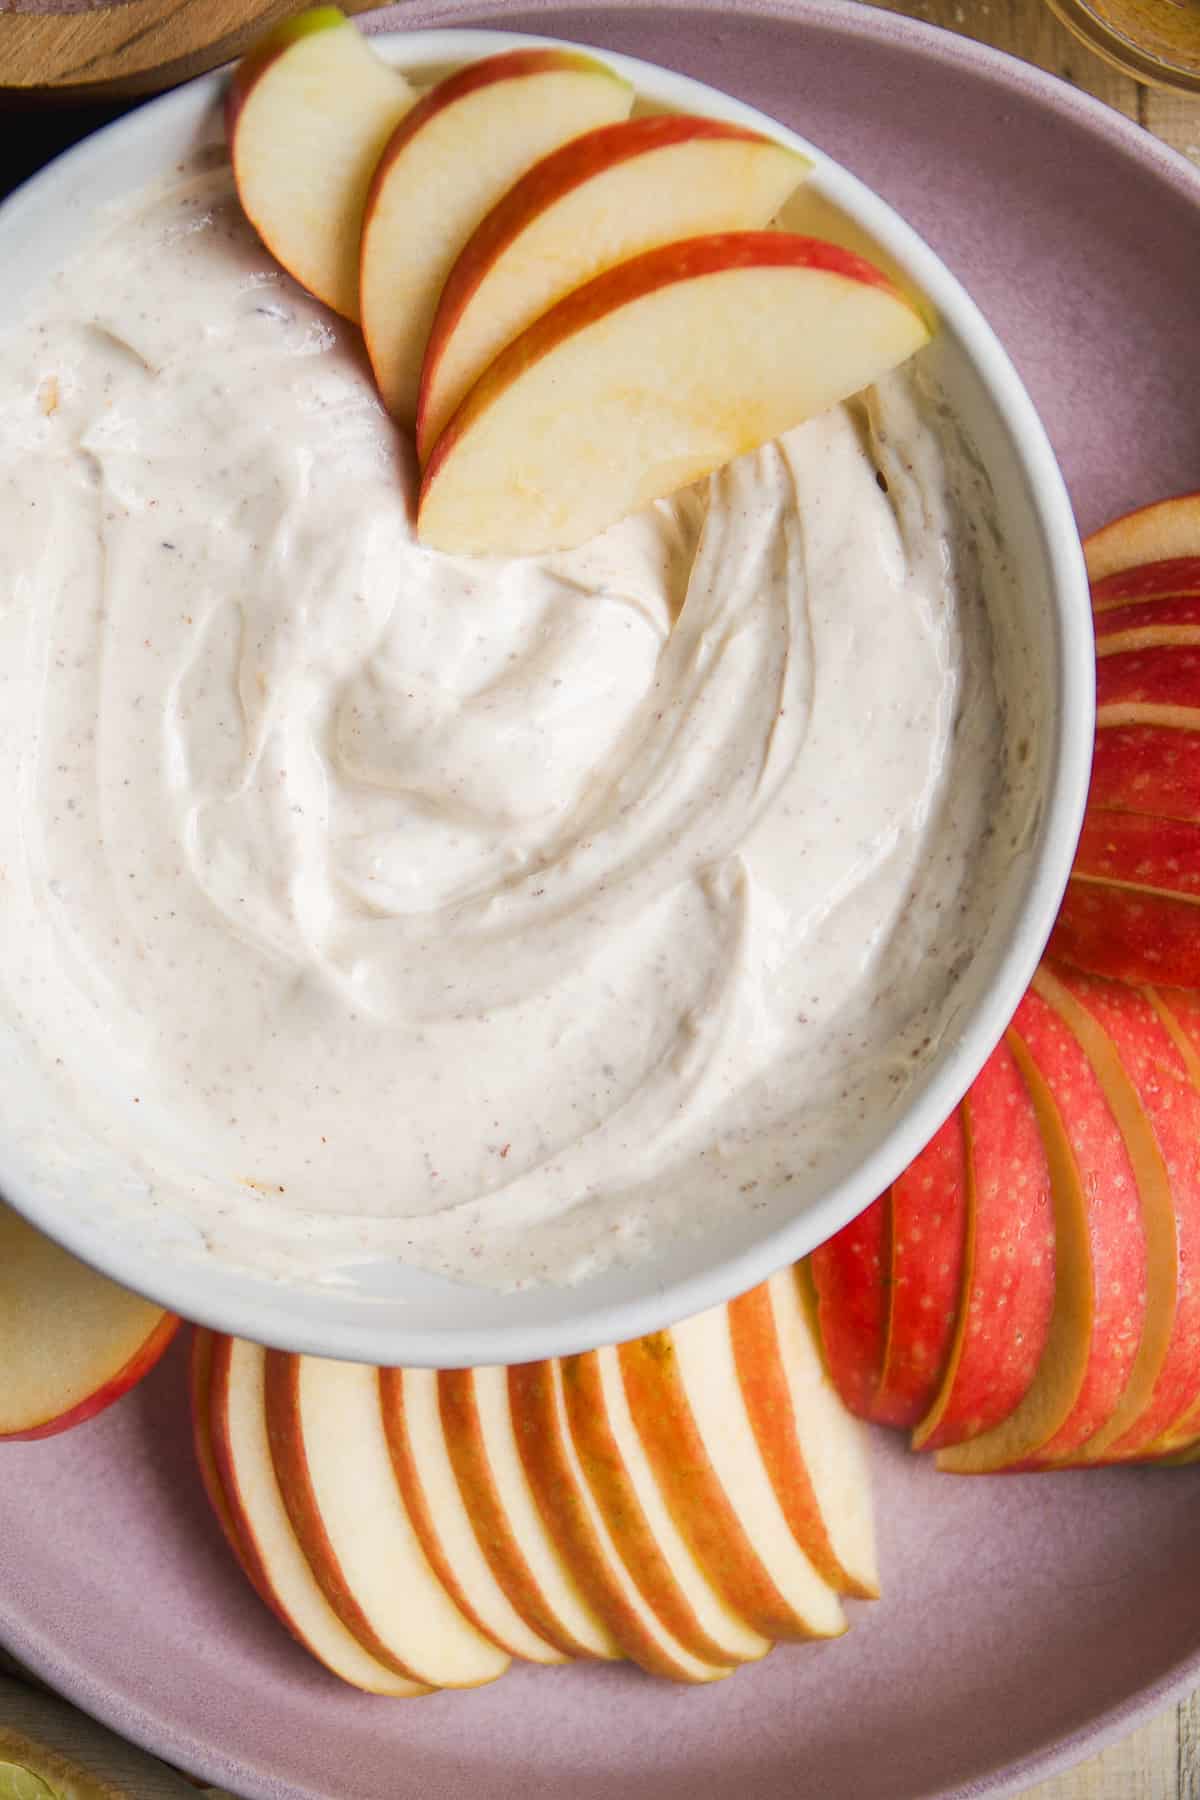 Apples cut into slices with a bowl of almond butter yogurt dip.